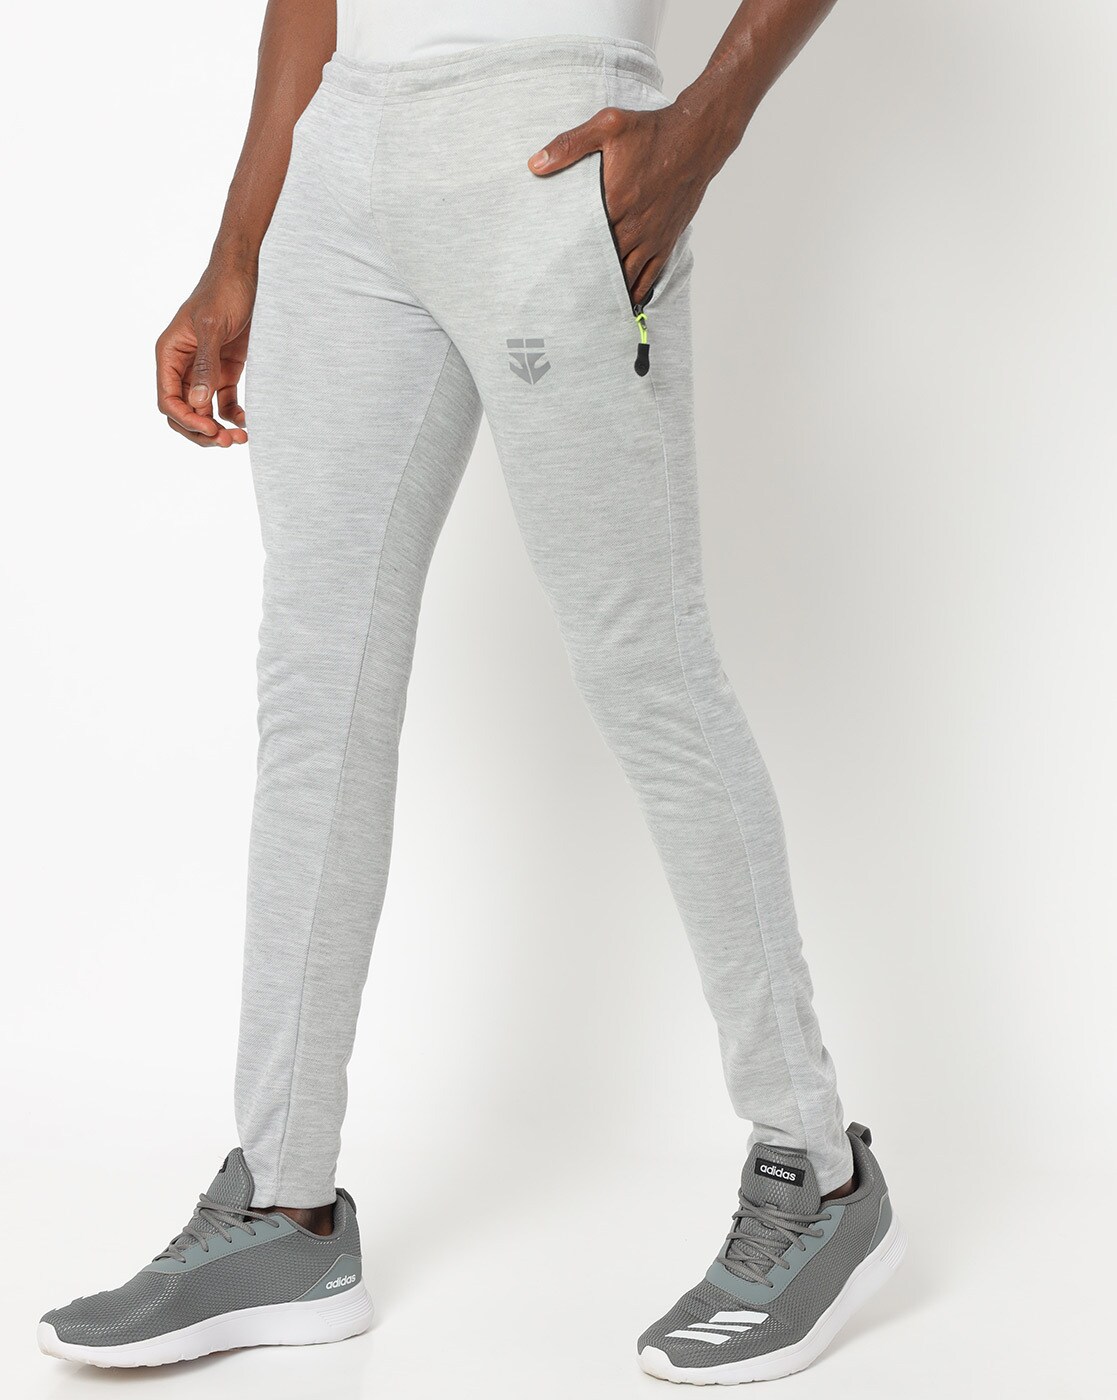 Buy Red Track Pants for Men by The Dry State Online  Ajiocom